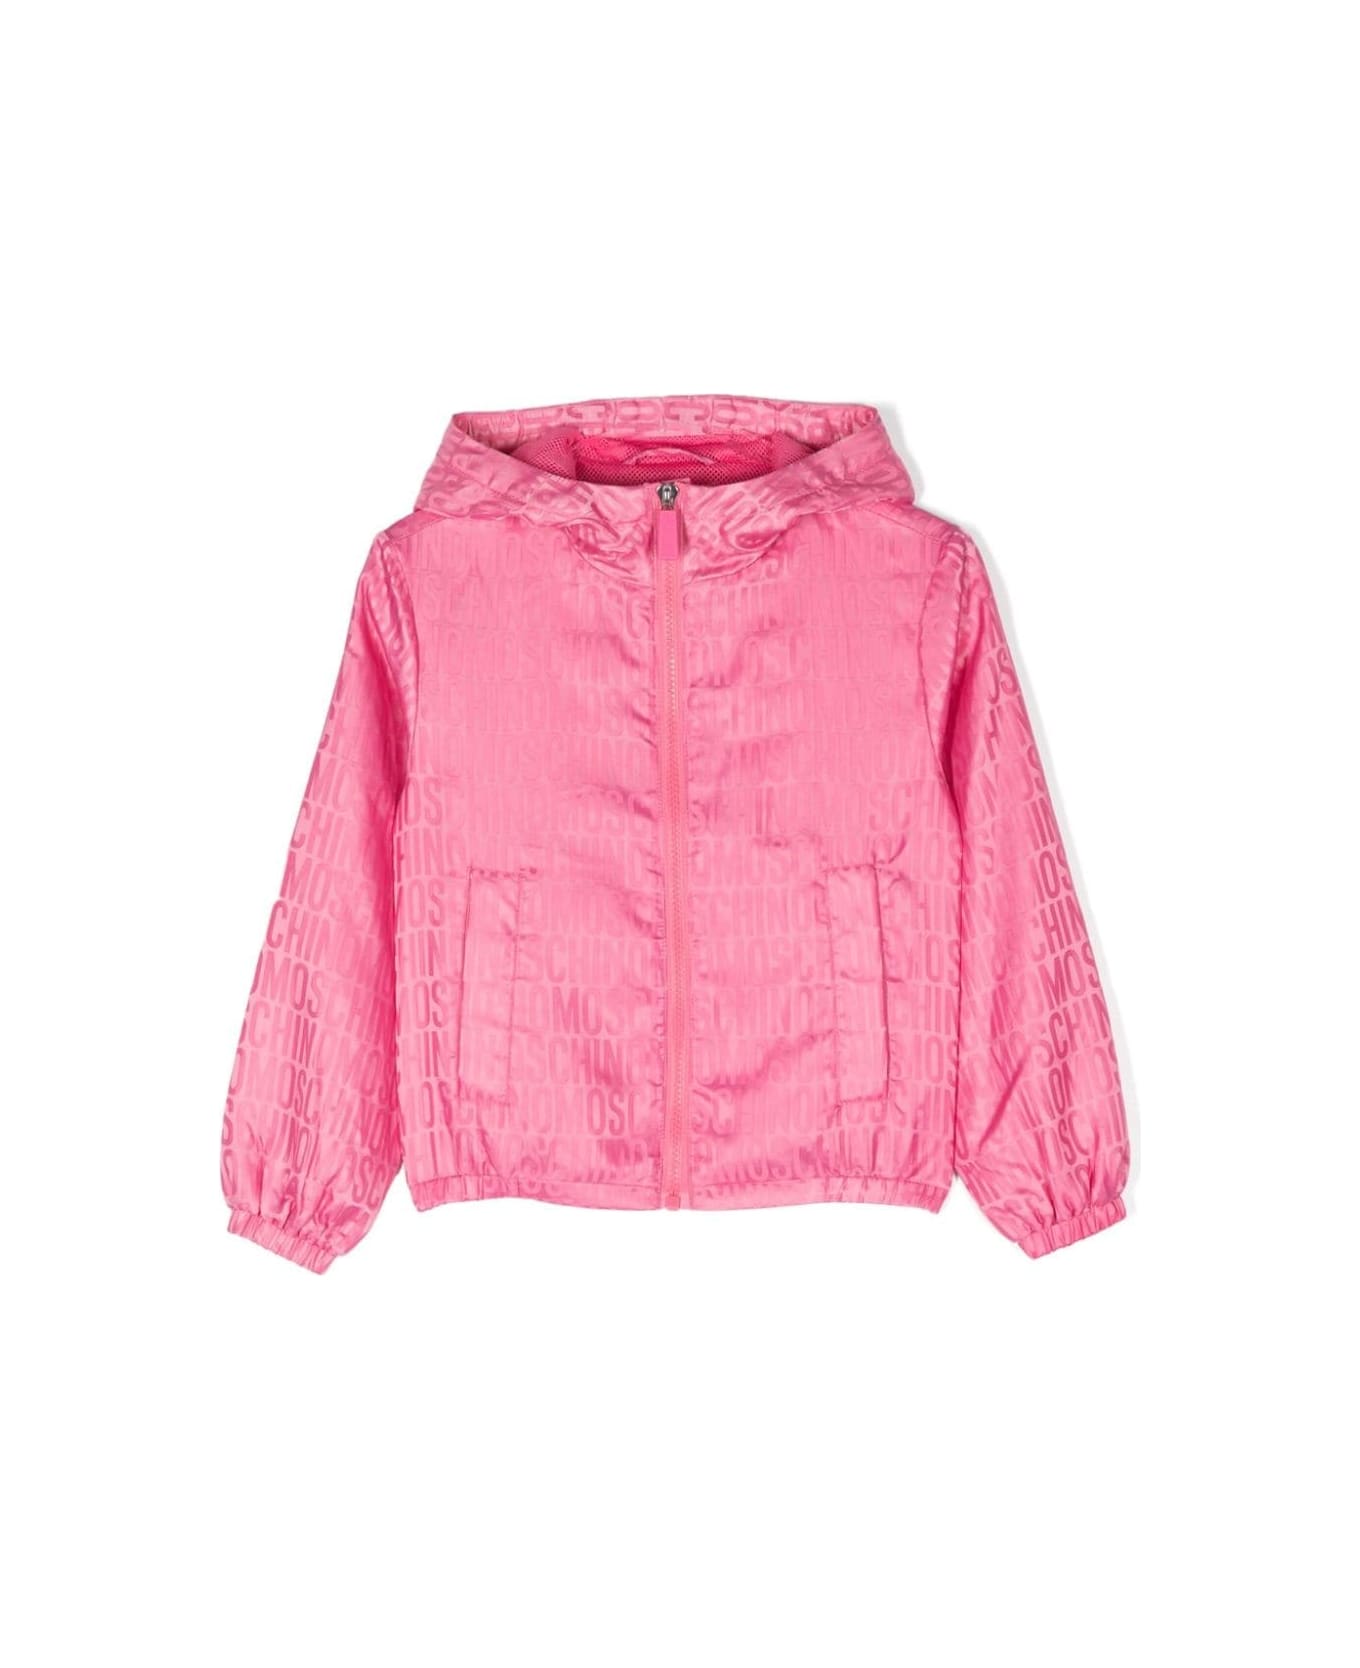 Moschino Pink Windbreaker Jacket With All-over Jacquard Logo - Pink